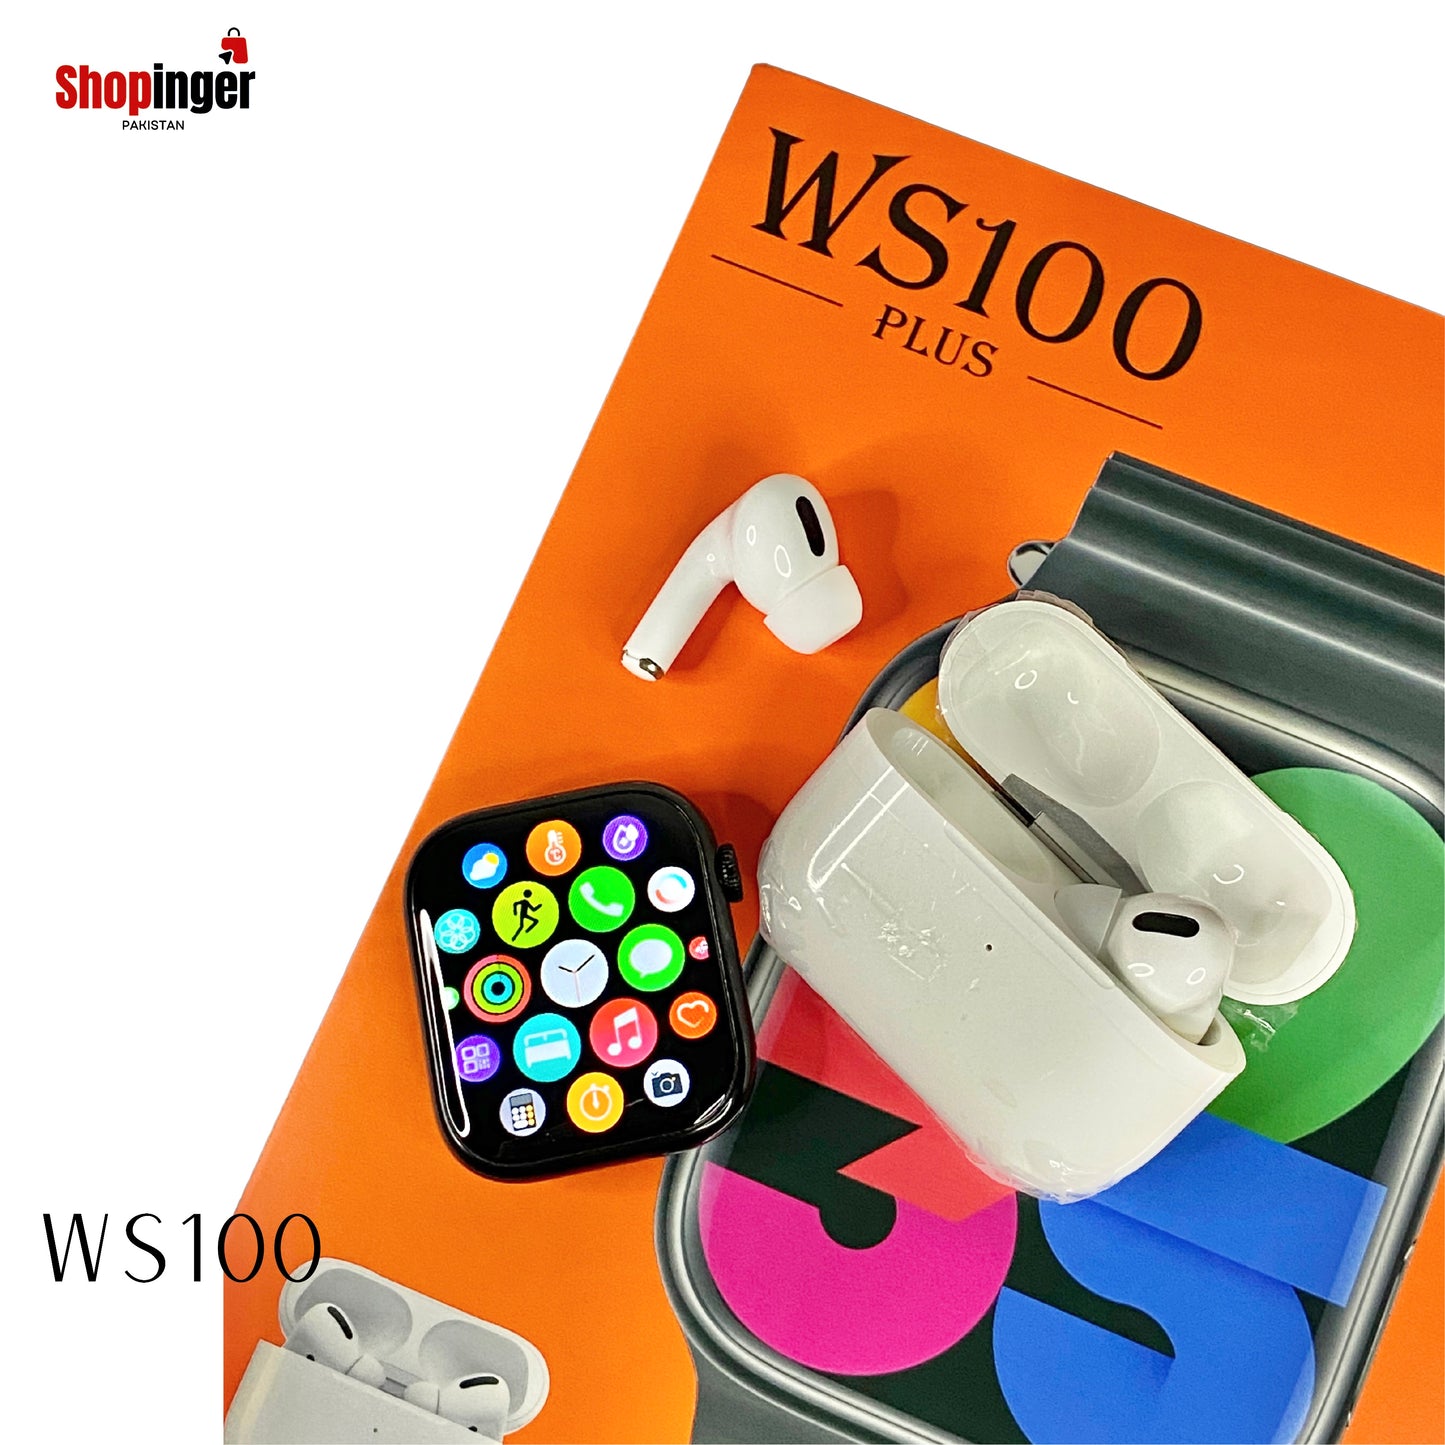 WS100 Plus (Smart watch with 7 free straps + free ear buds)